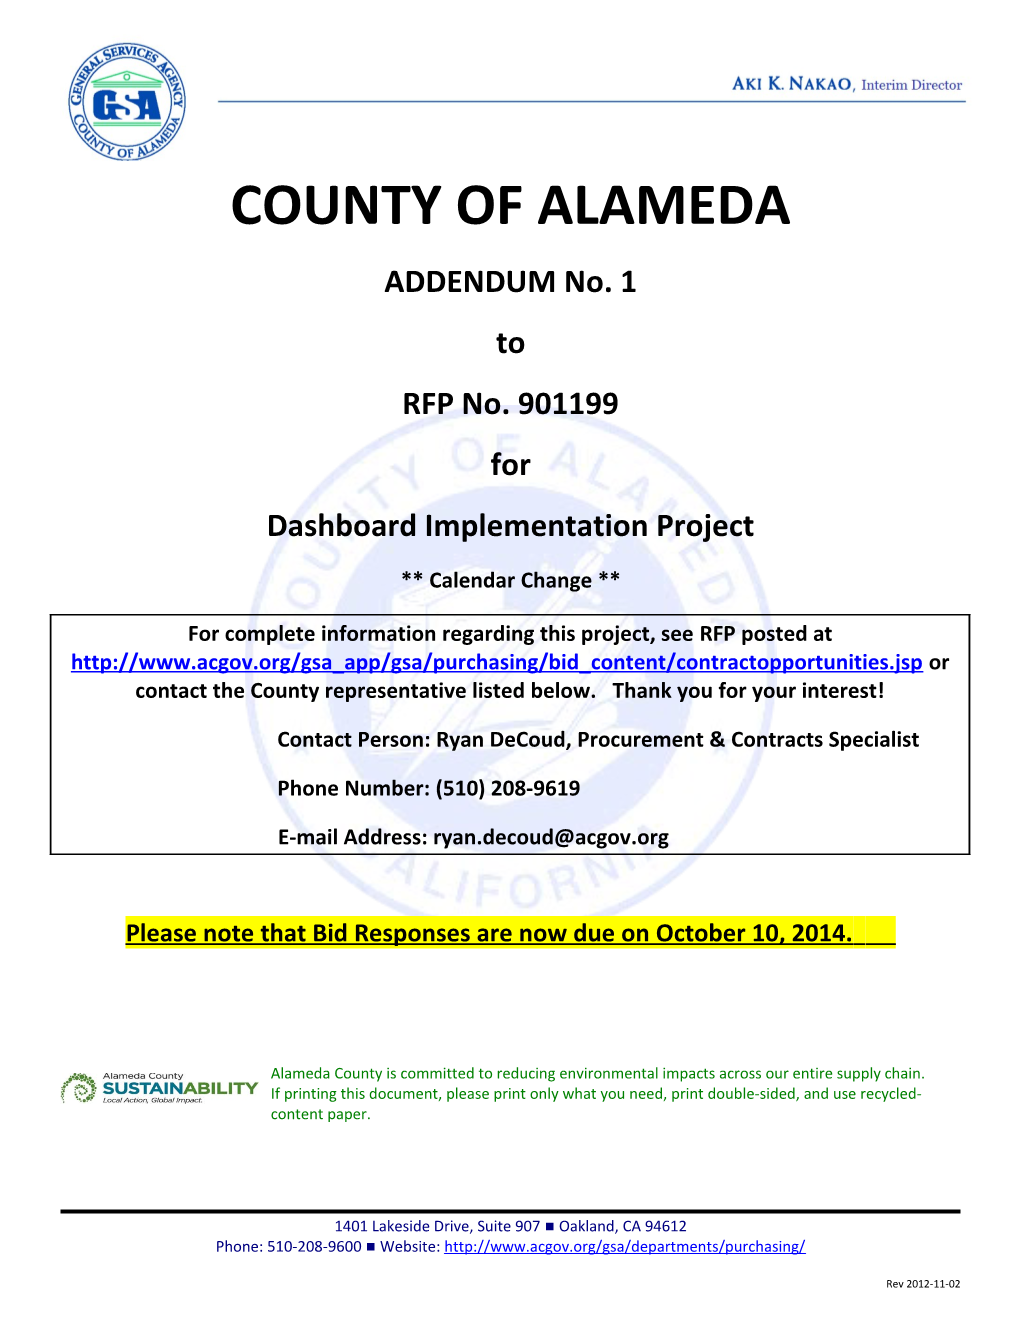 County of Alameda s22